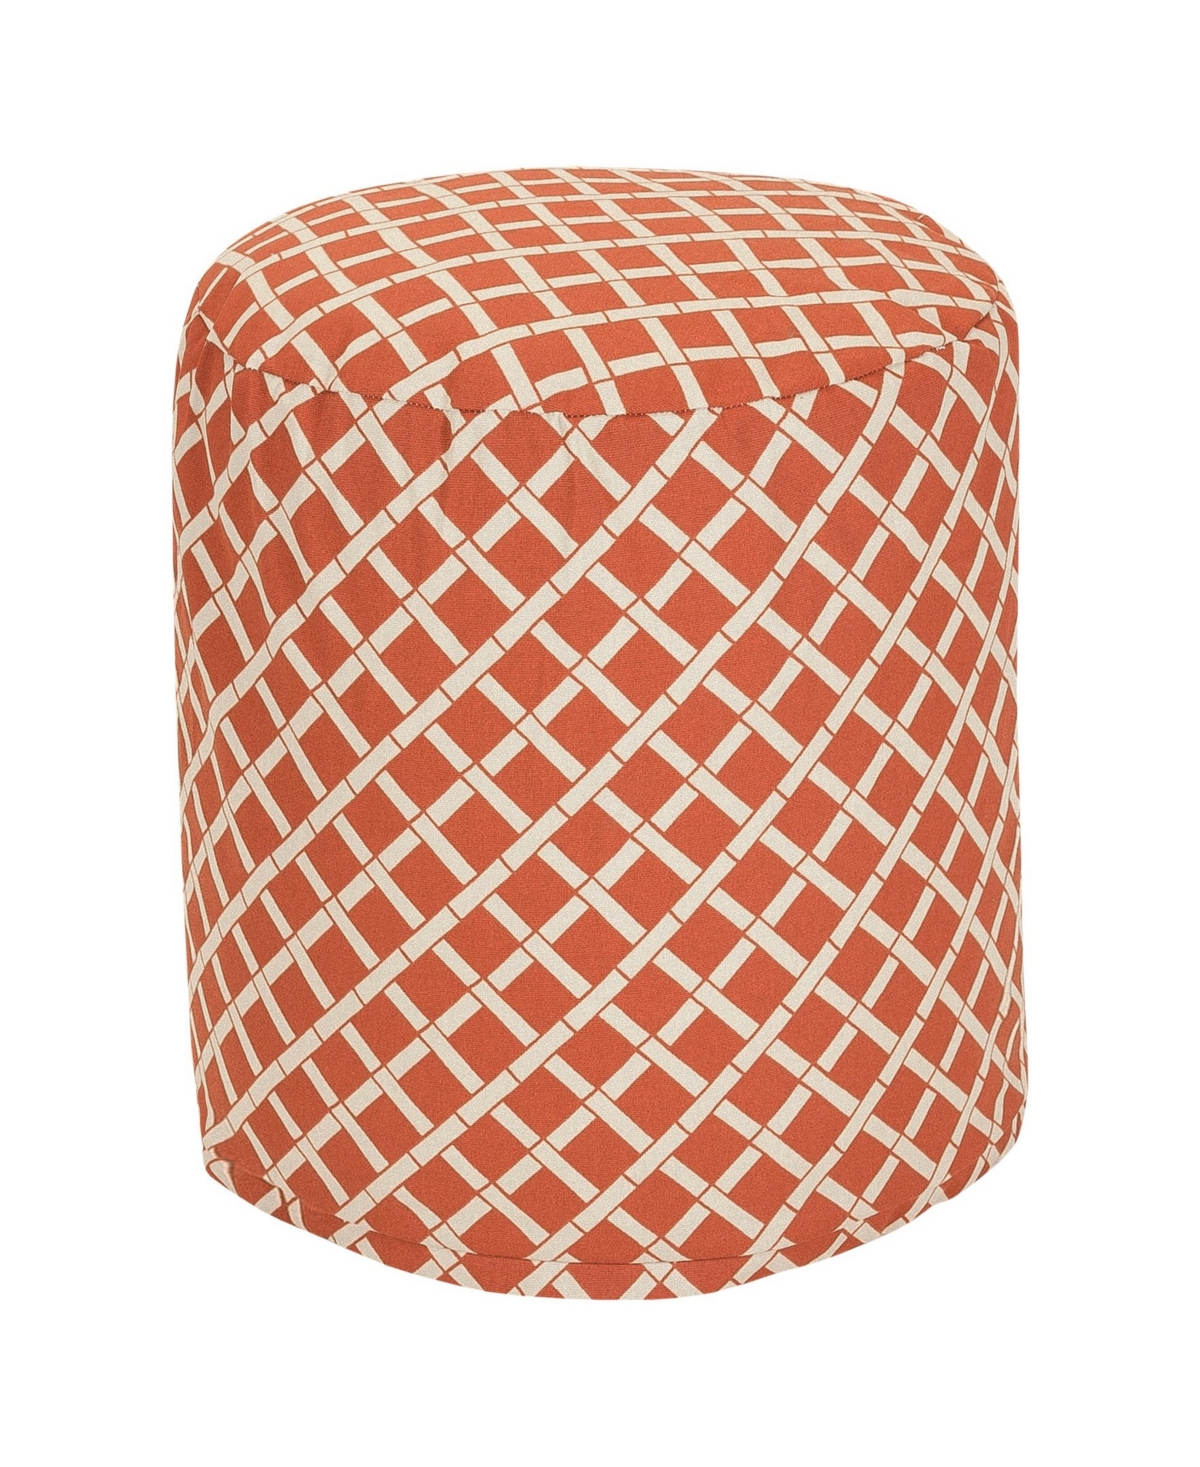 UPC 859072204027 product image for Majestic Home Goods Ottoman Round Pouf 16